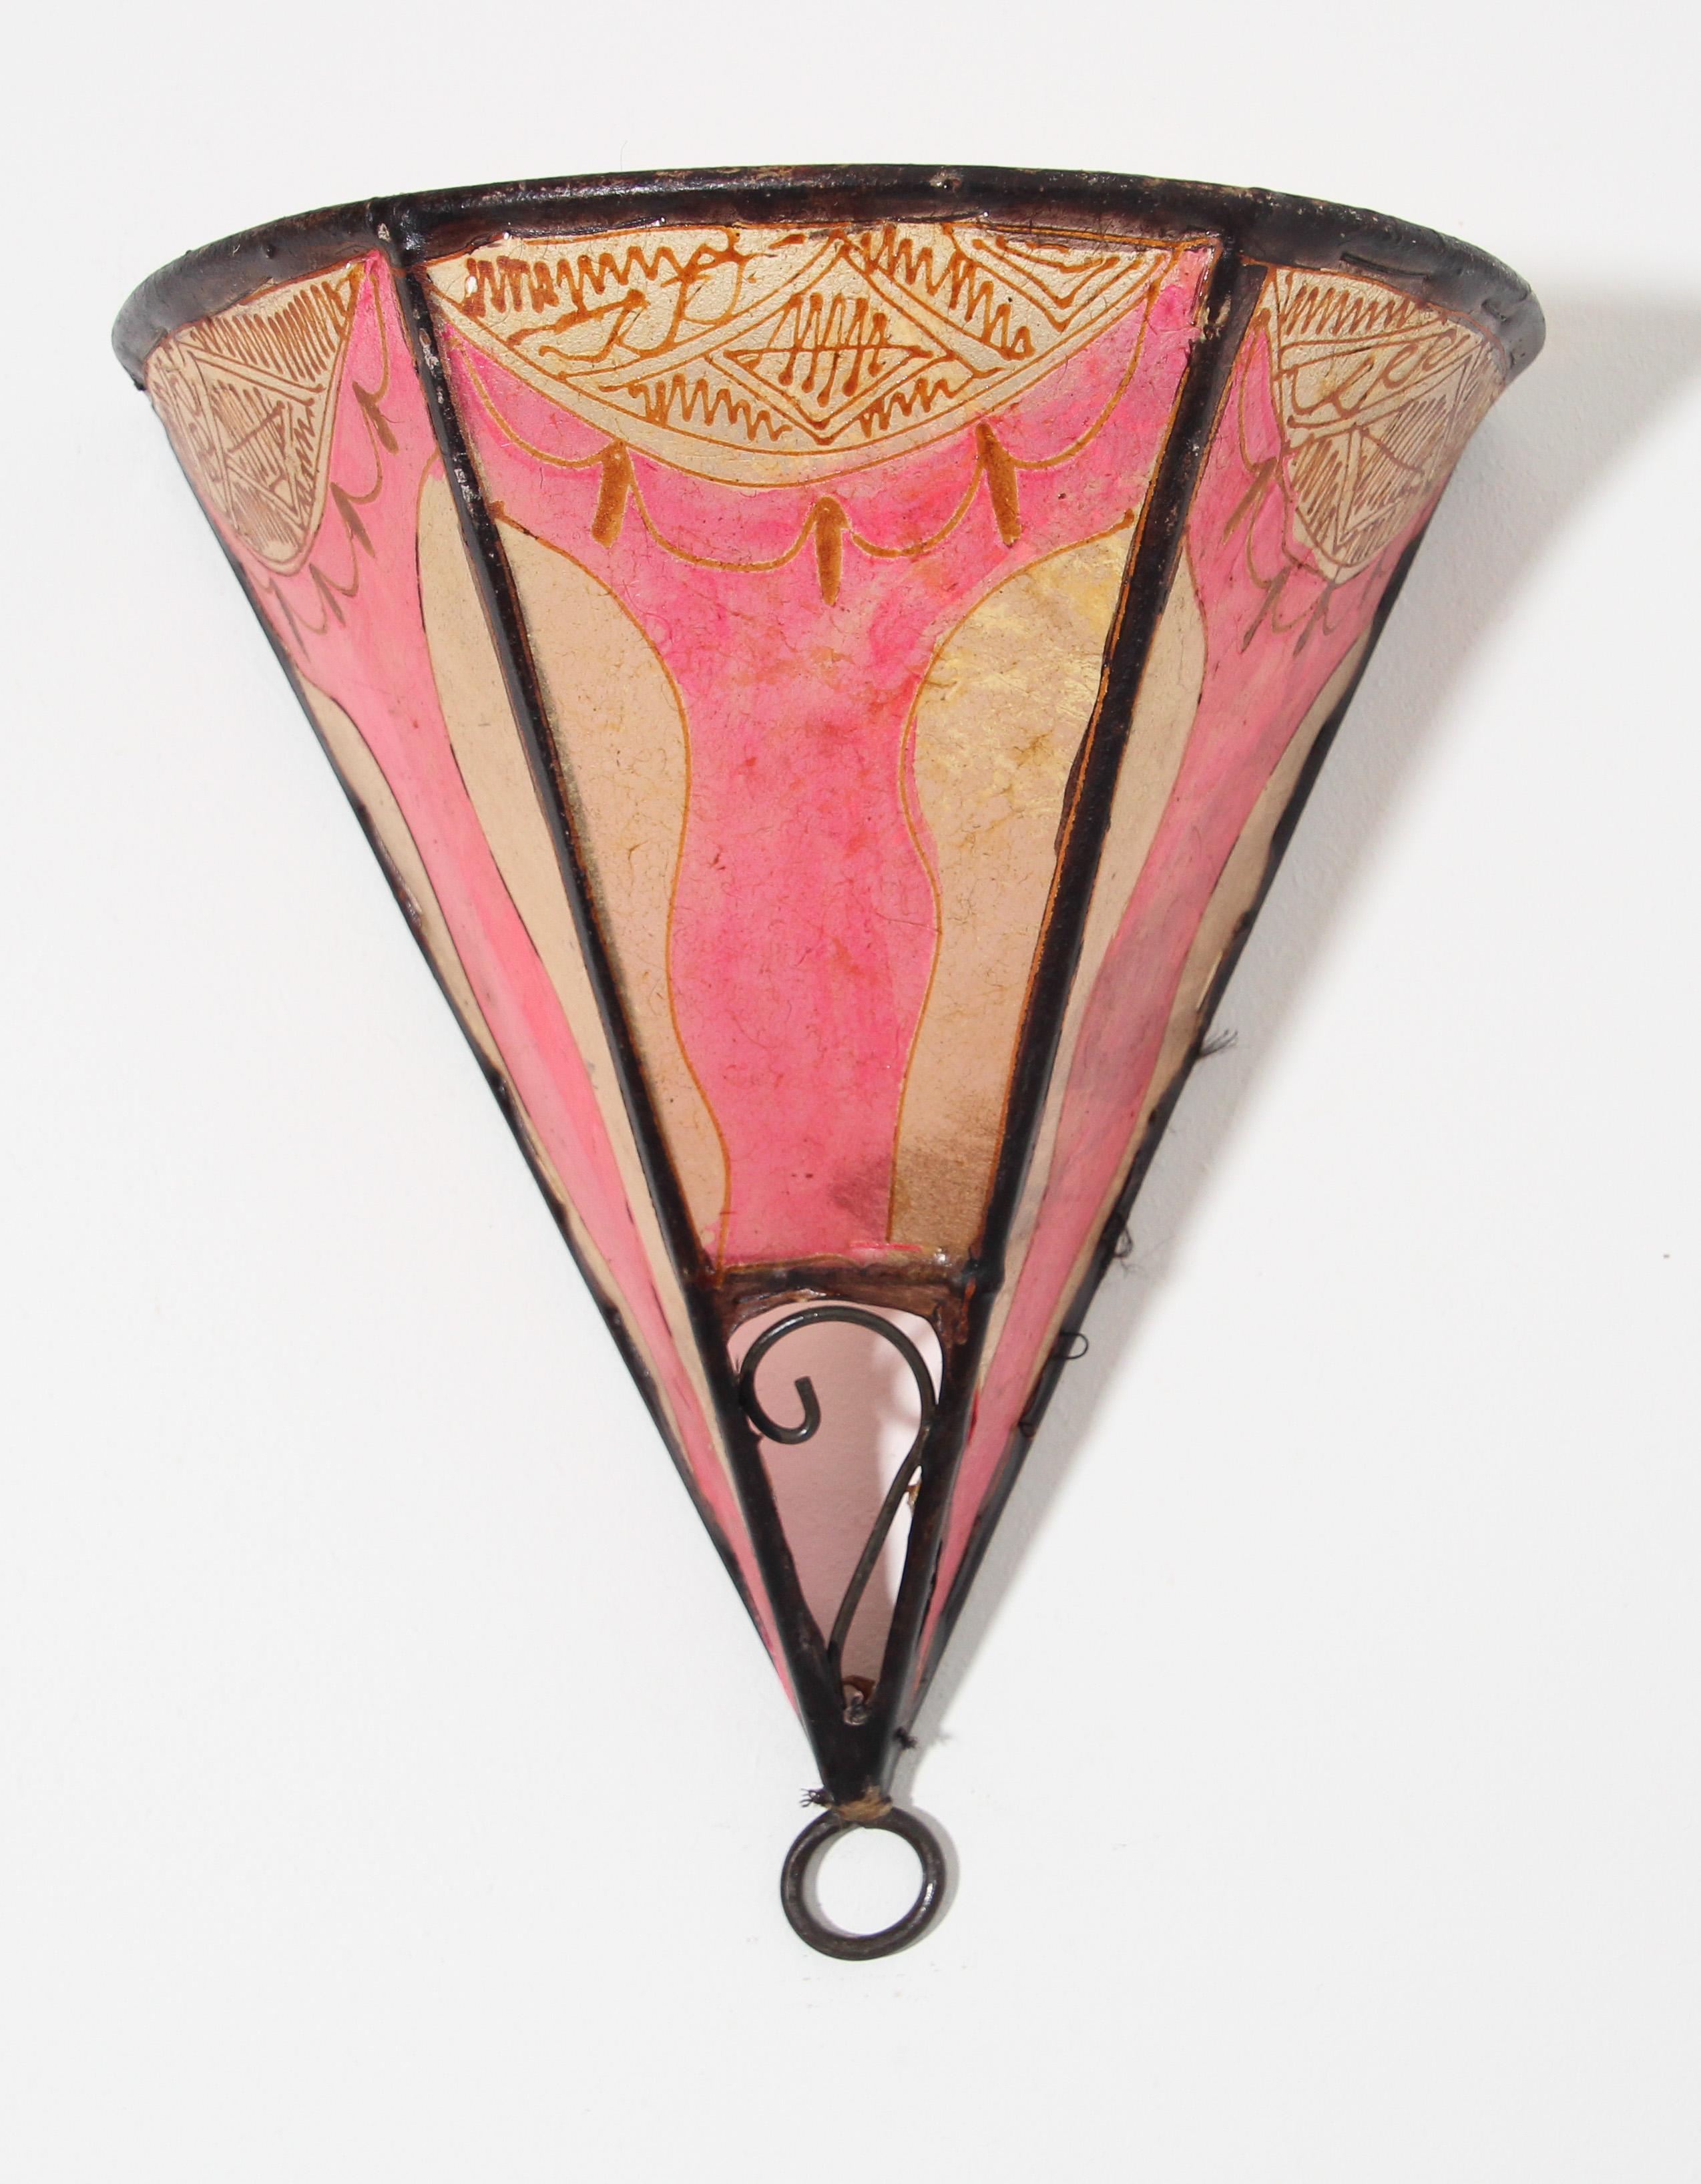 African tribal art parchment wall shade sconce featuring a large triangle hide form stitched on iron and hand painted surface.
These Moroccan art pieces could be used as wall lamp shade.
Iron frame covered with hide parchment which has been hand